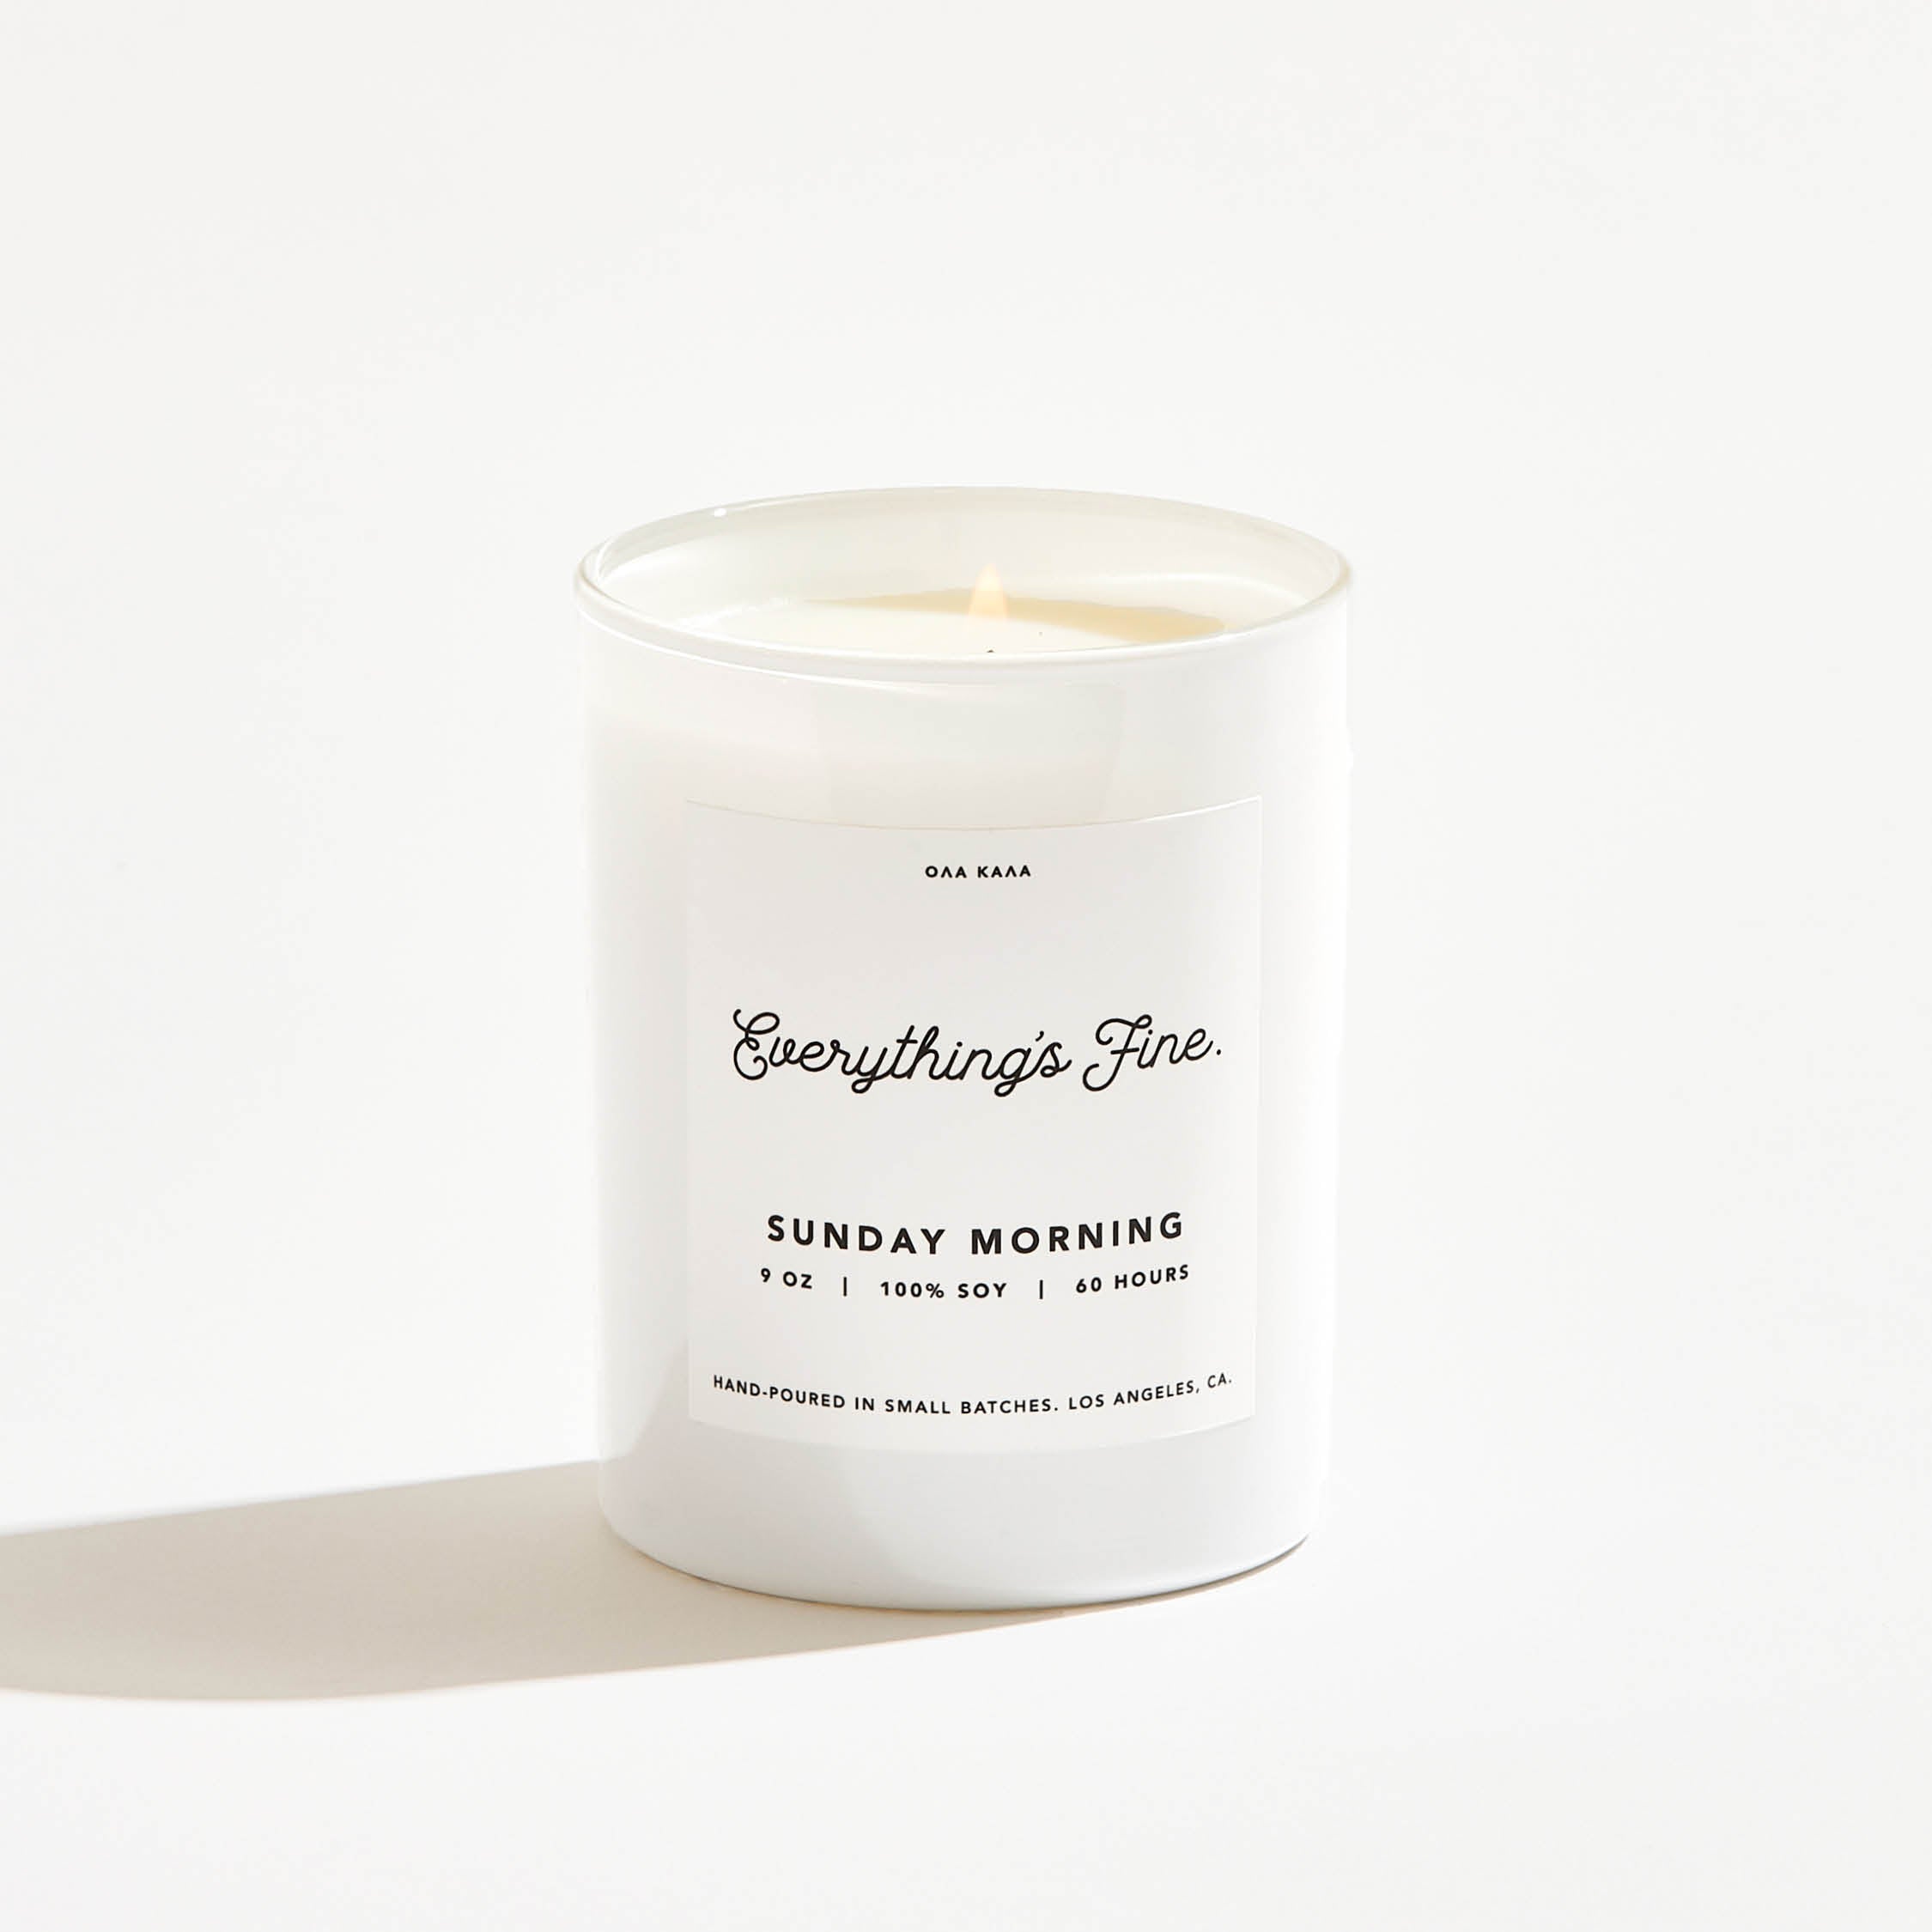 100% soy wax, hand-poured in ultra small batches in Los Angeles, CA. Made with a lead-free cotton wick and premium fragrance and essential oils for a clean burn. Bacon, maple, brown sugar, brown butter, vanilla. 